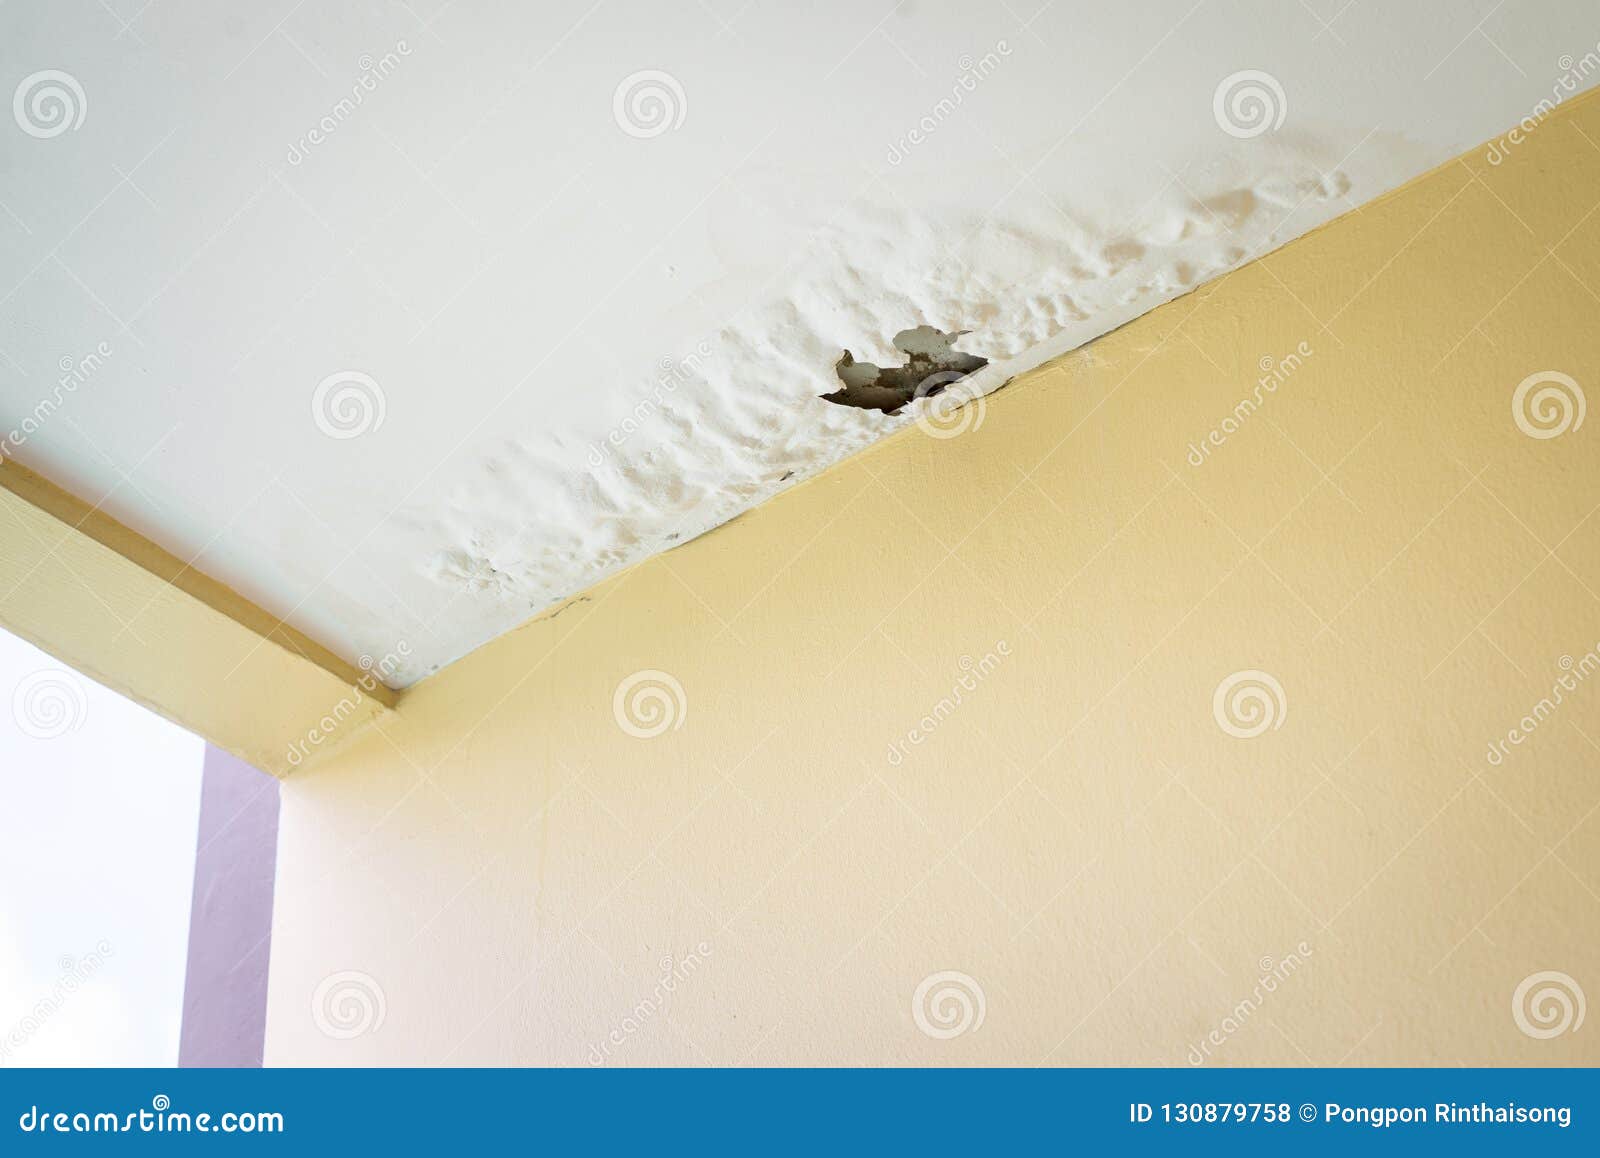 Damaged Ceiling From Water Leak Stock Photo Image Of Leak